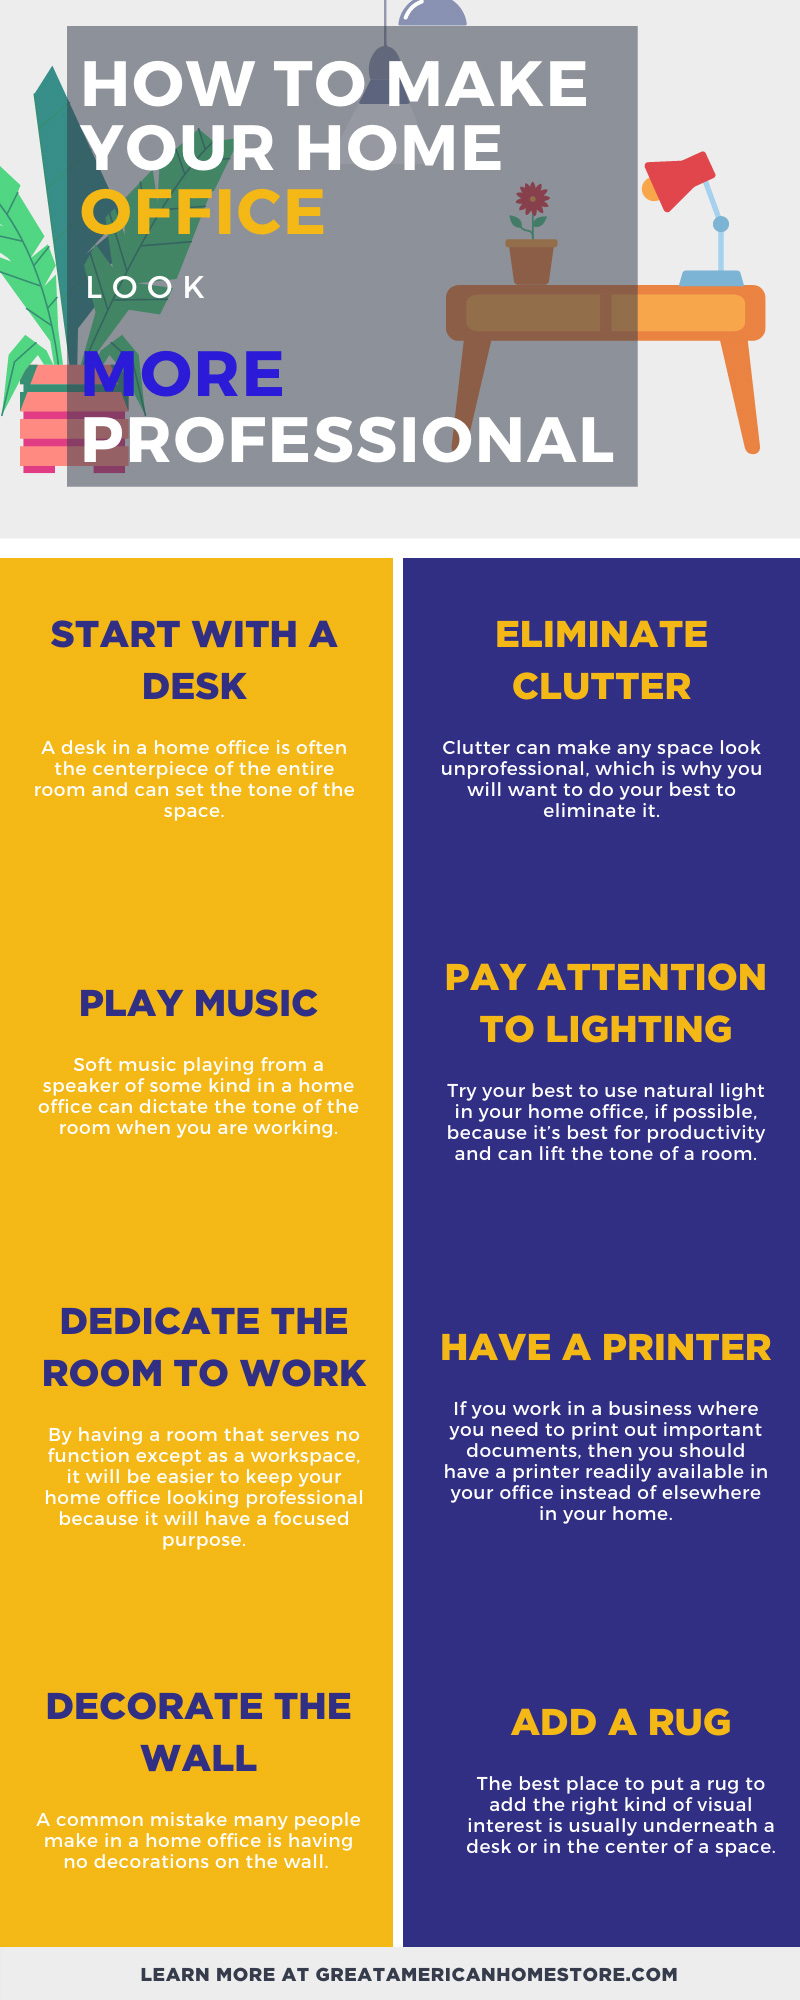 How to make your home office more professional infographic